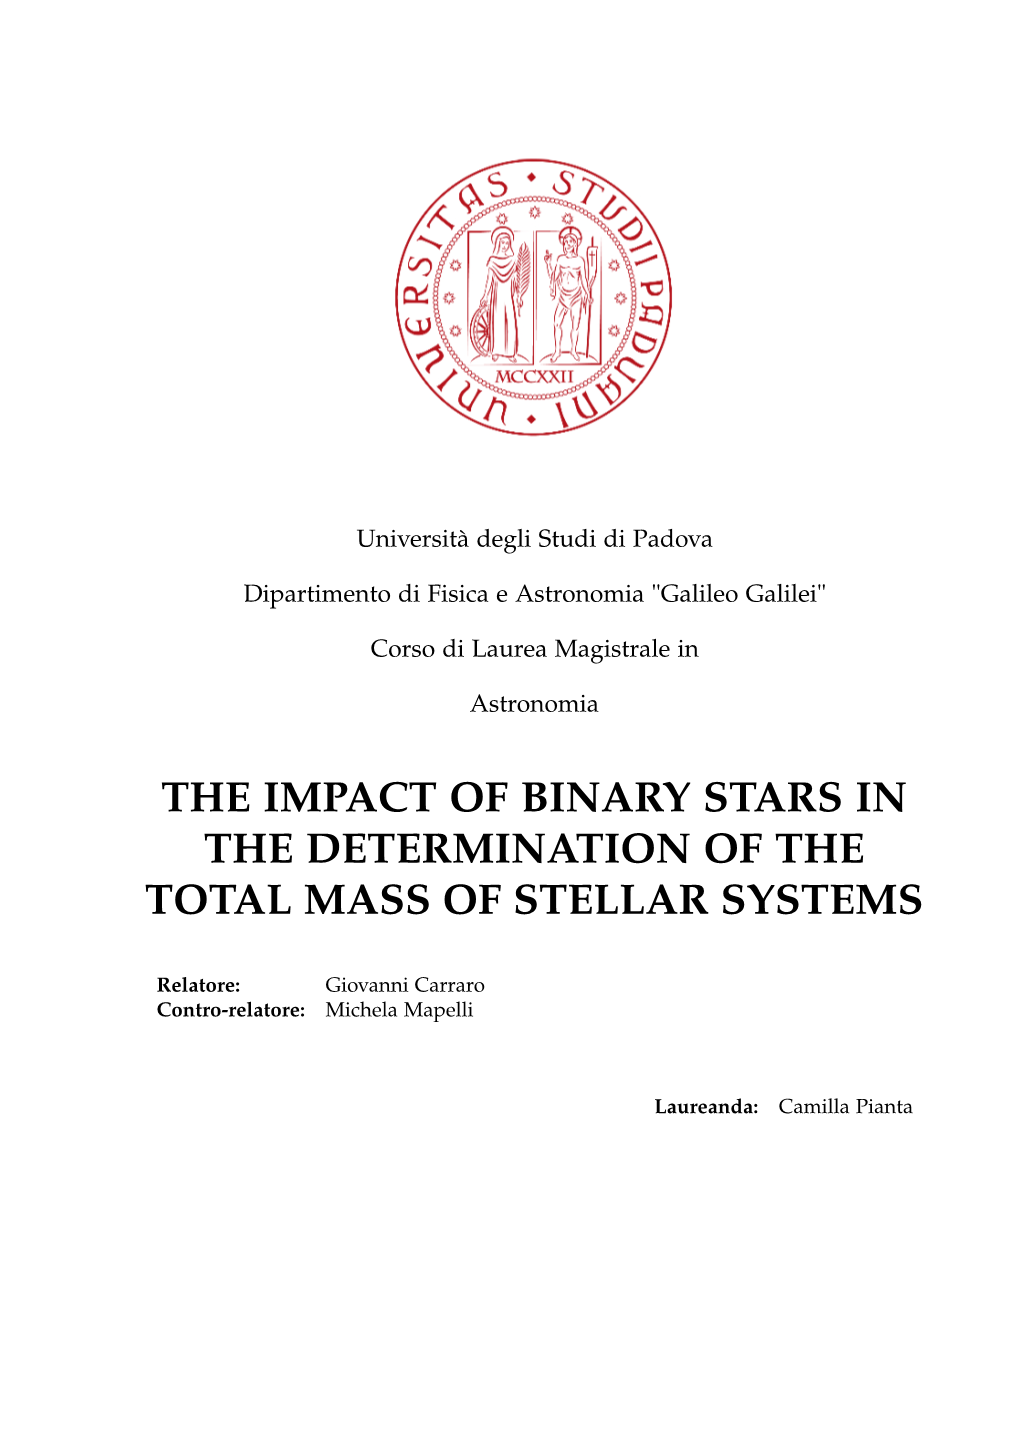 The Impact of Binary Stars in the Determination of the Total Mass of Stellar Systems